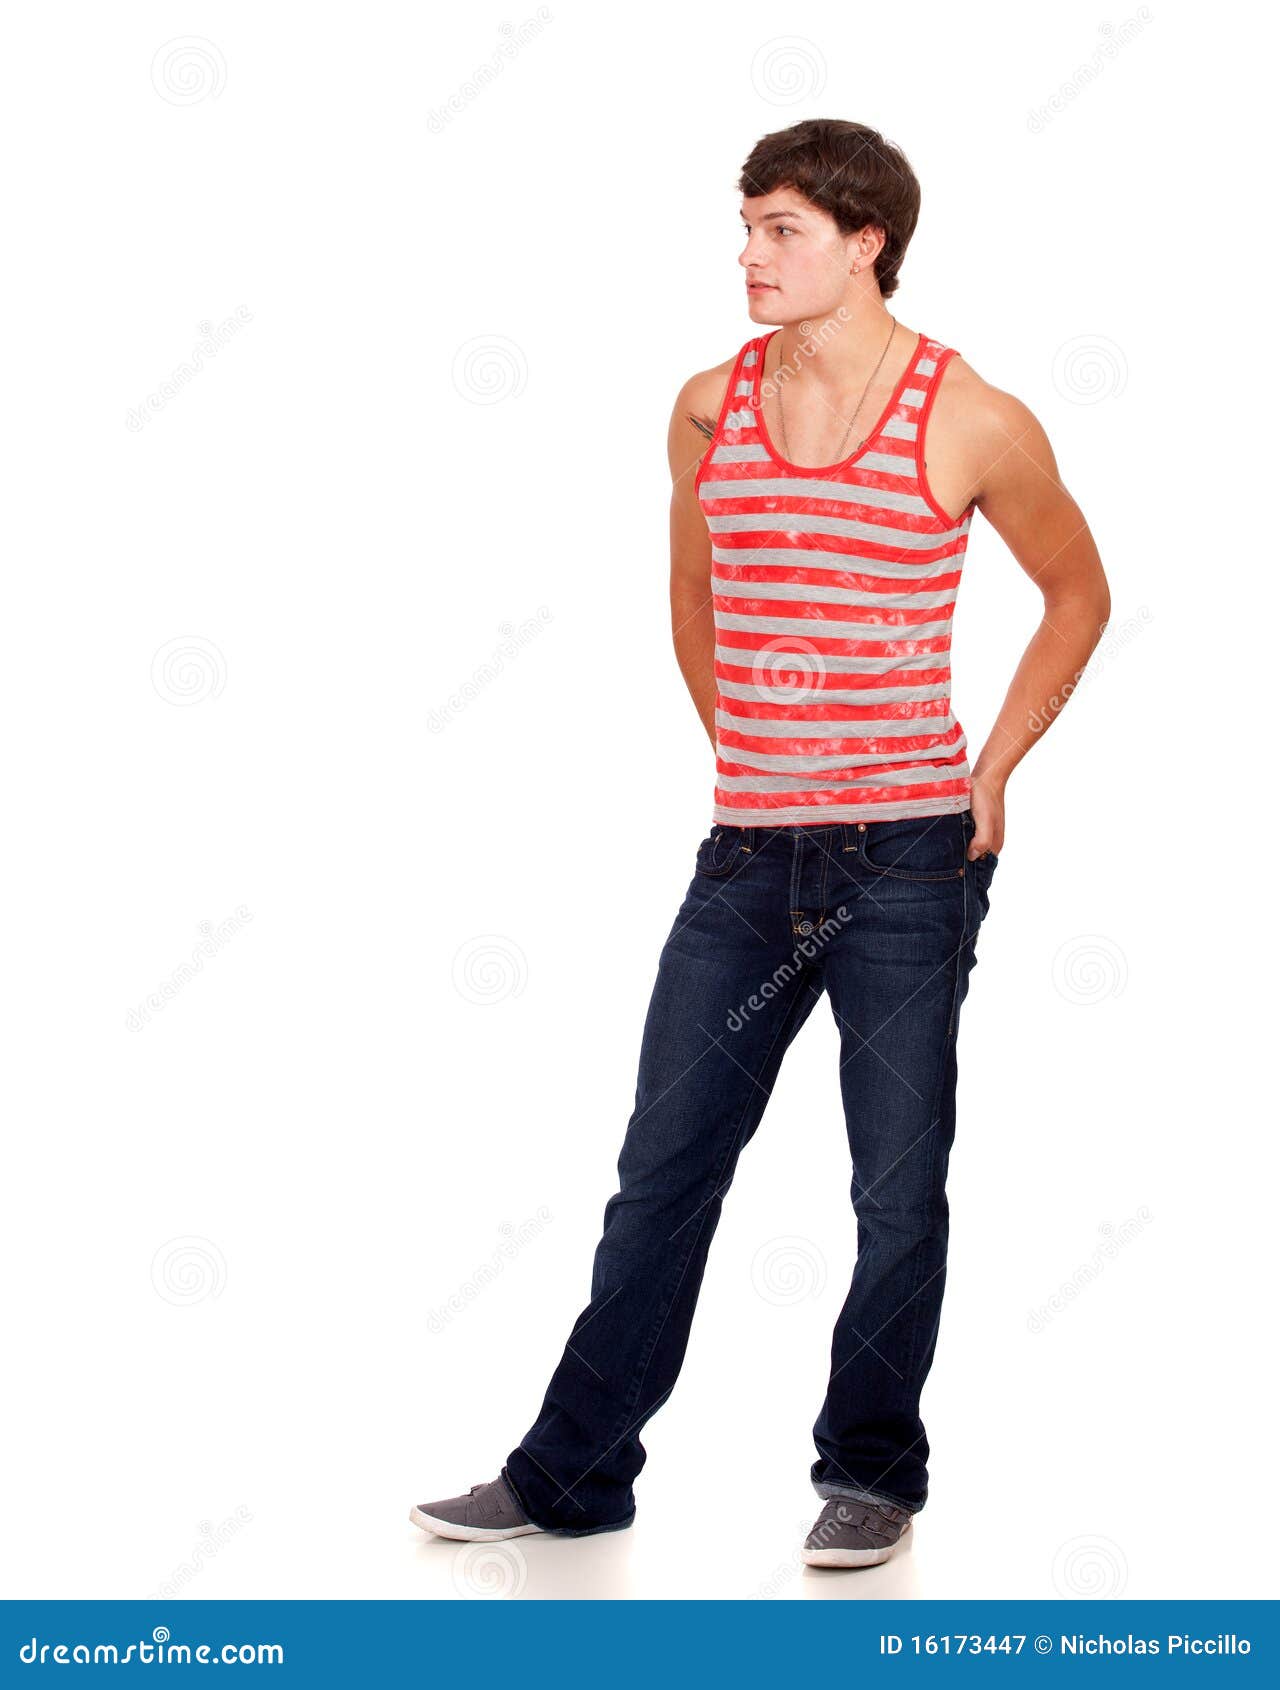 Young Man in Red and White Striped Shirt and Jeans Stock Image - Image ...